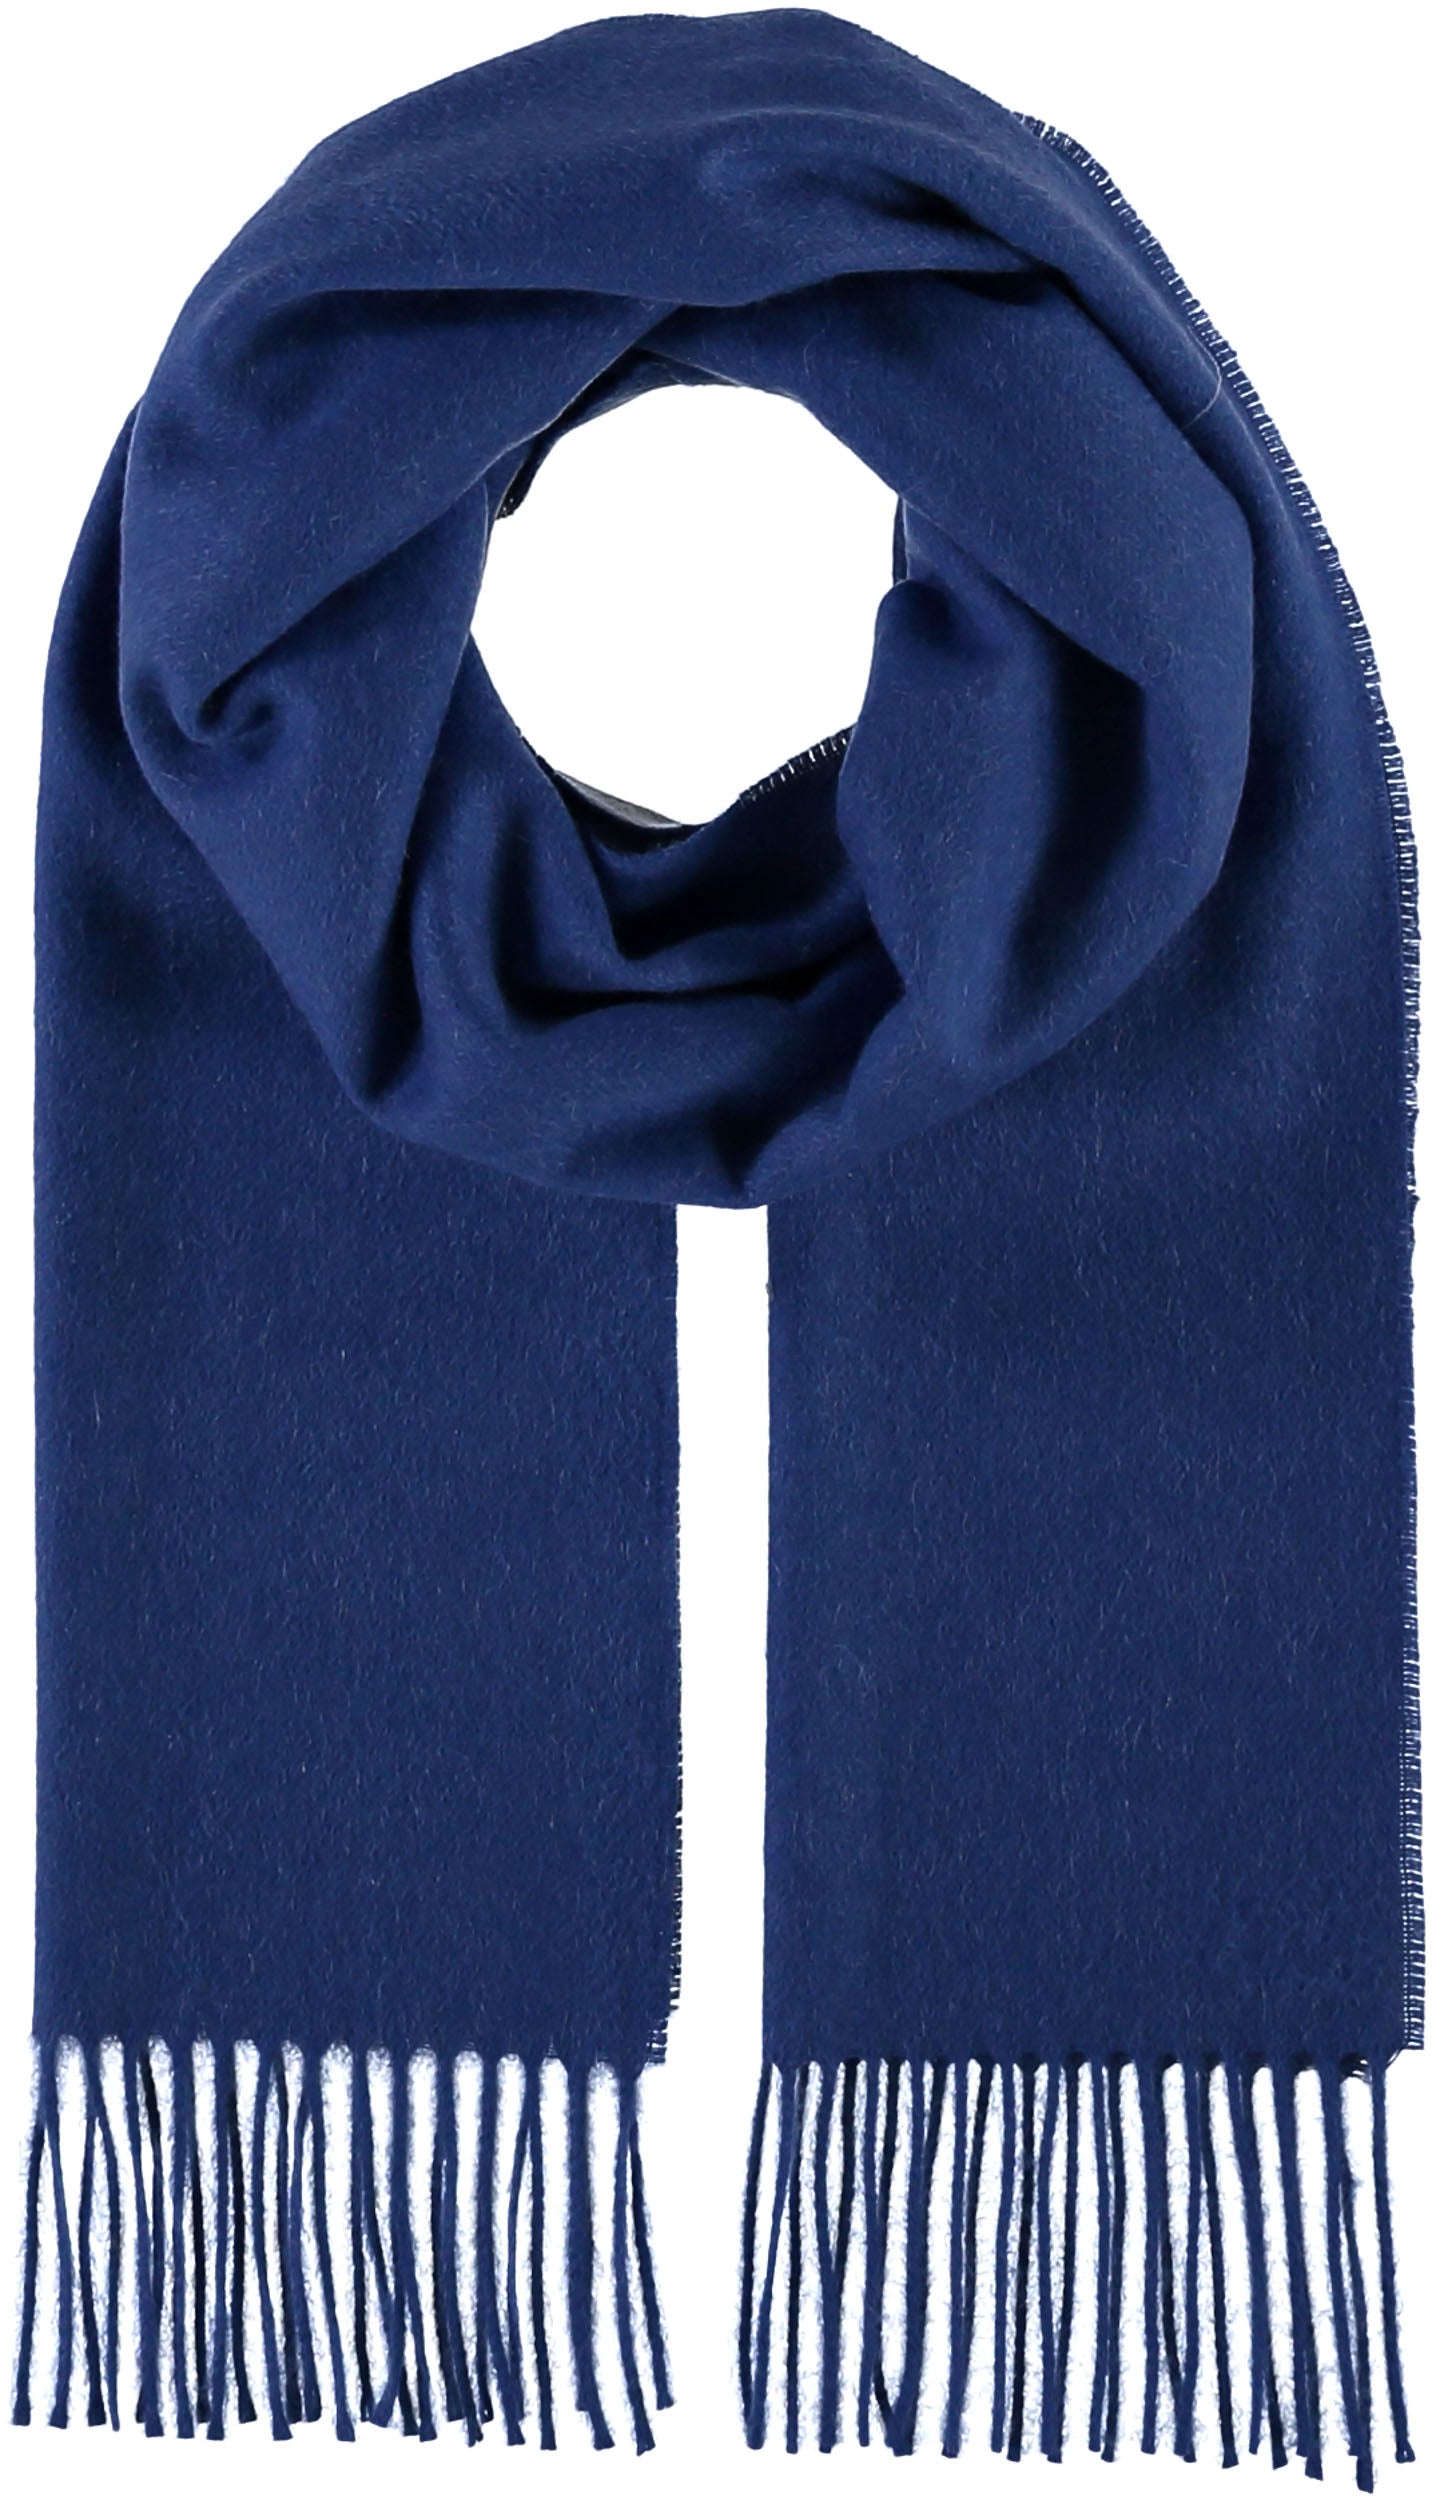 Cashmere scarf in Navy, Camel or Cobalt by Fraas